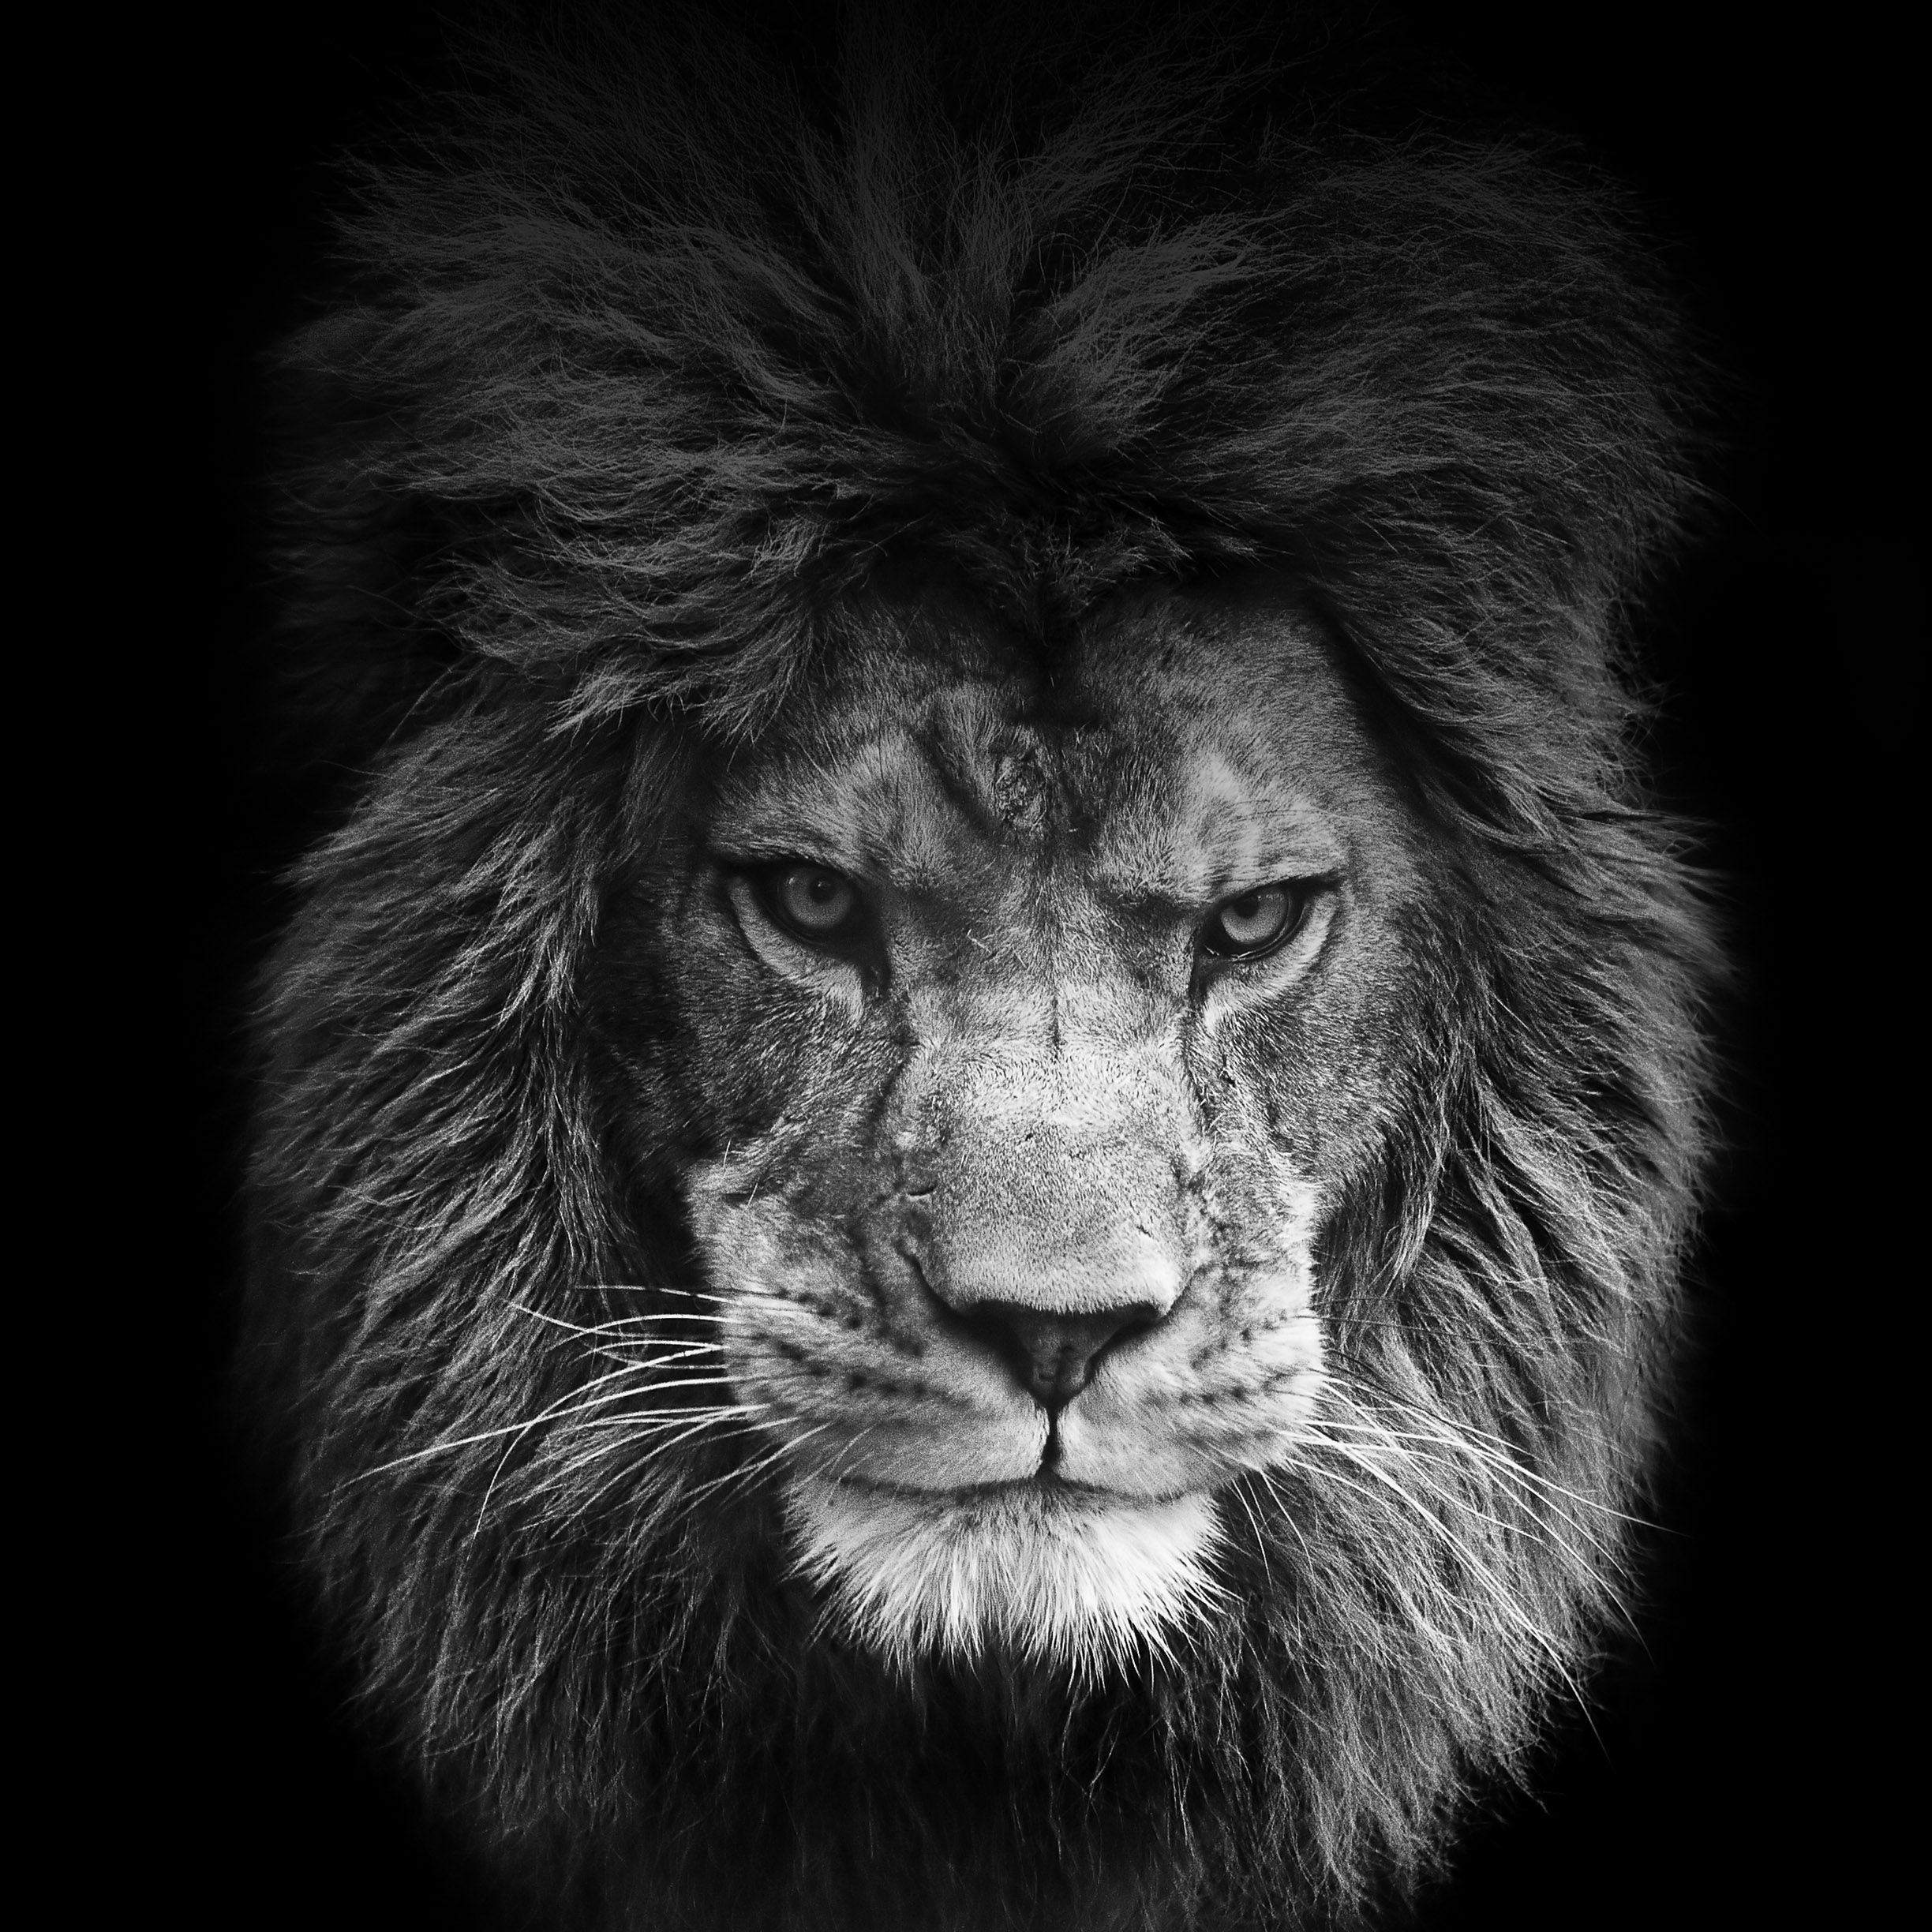 Lion wallpapers for iPhone and iPad